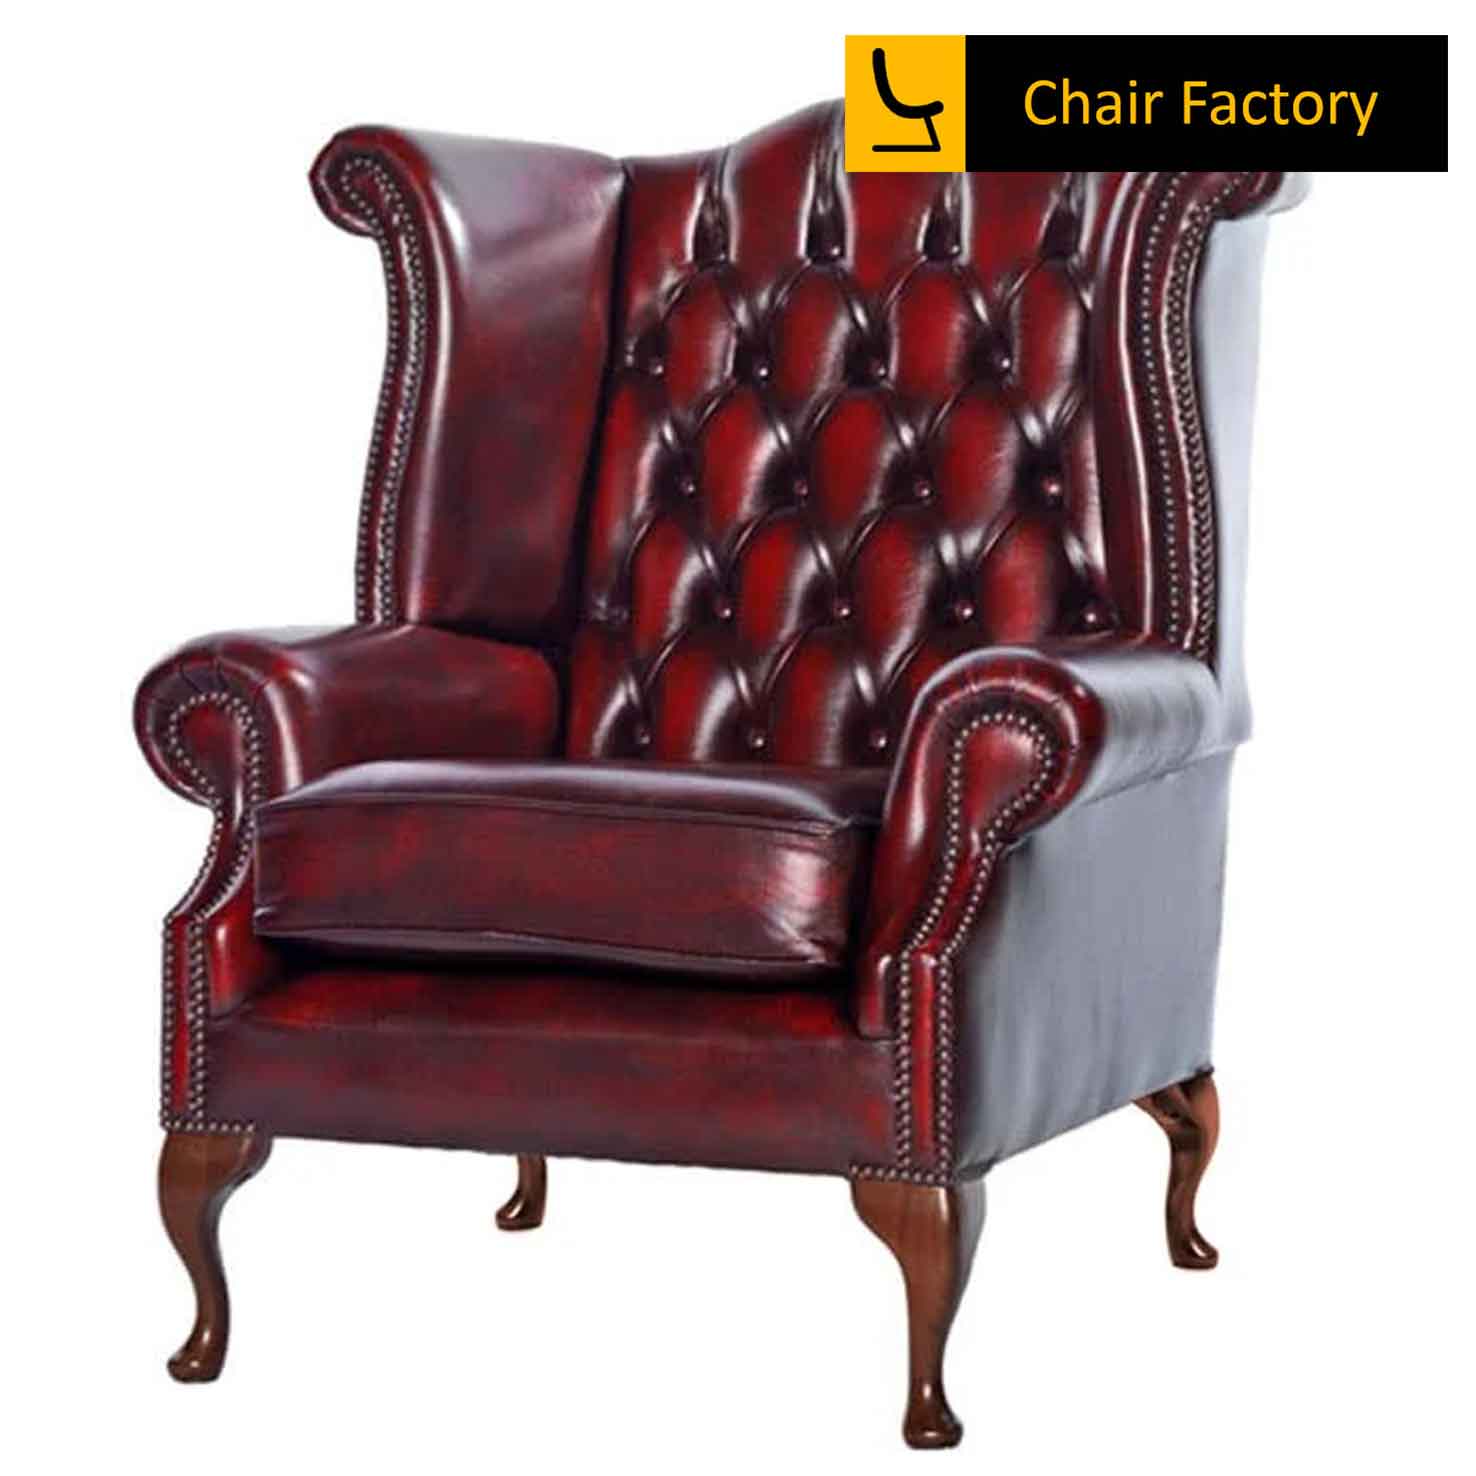 Augustus  genuine Leather Arm Chairs